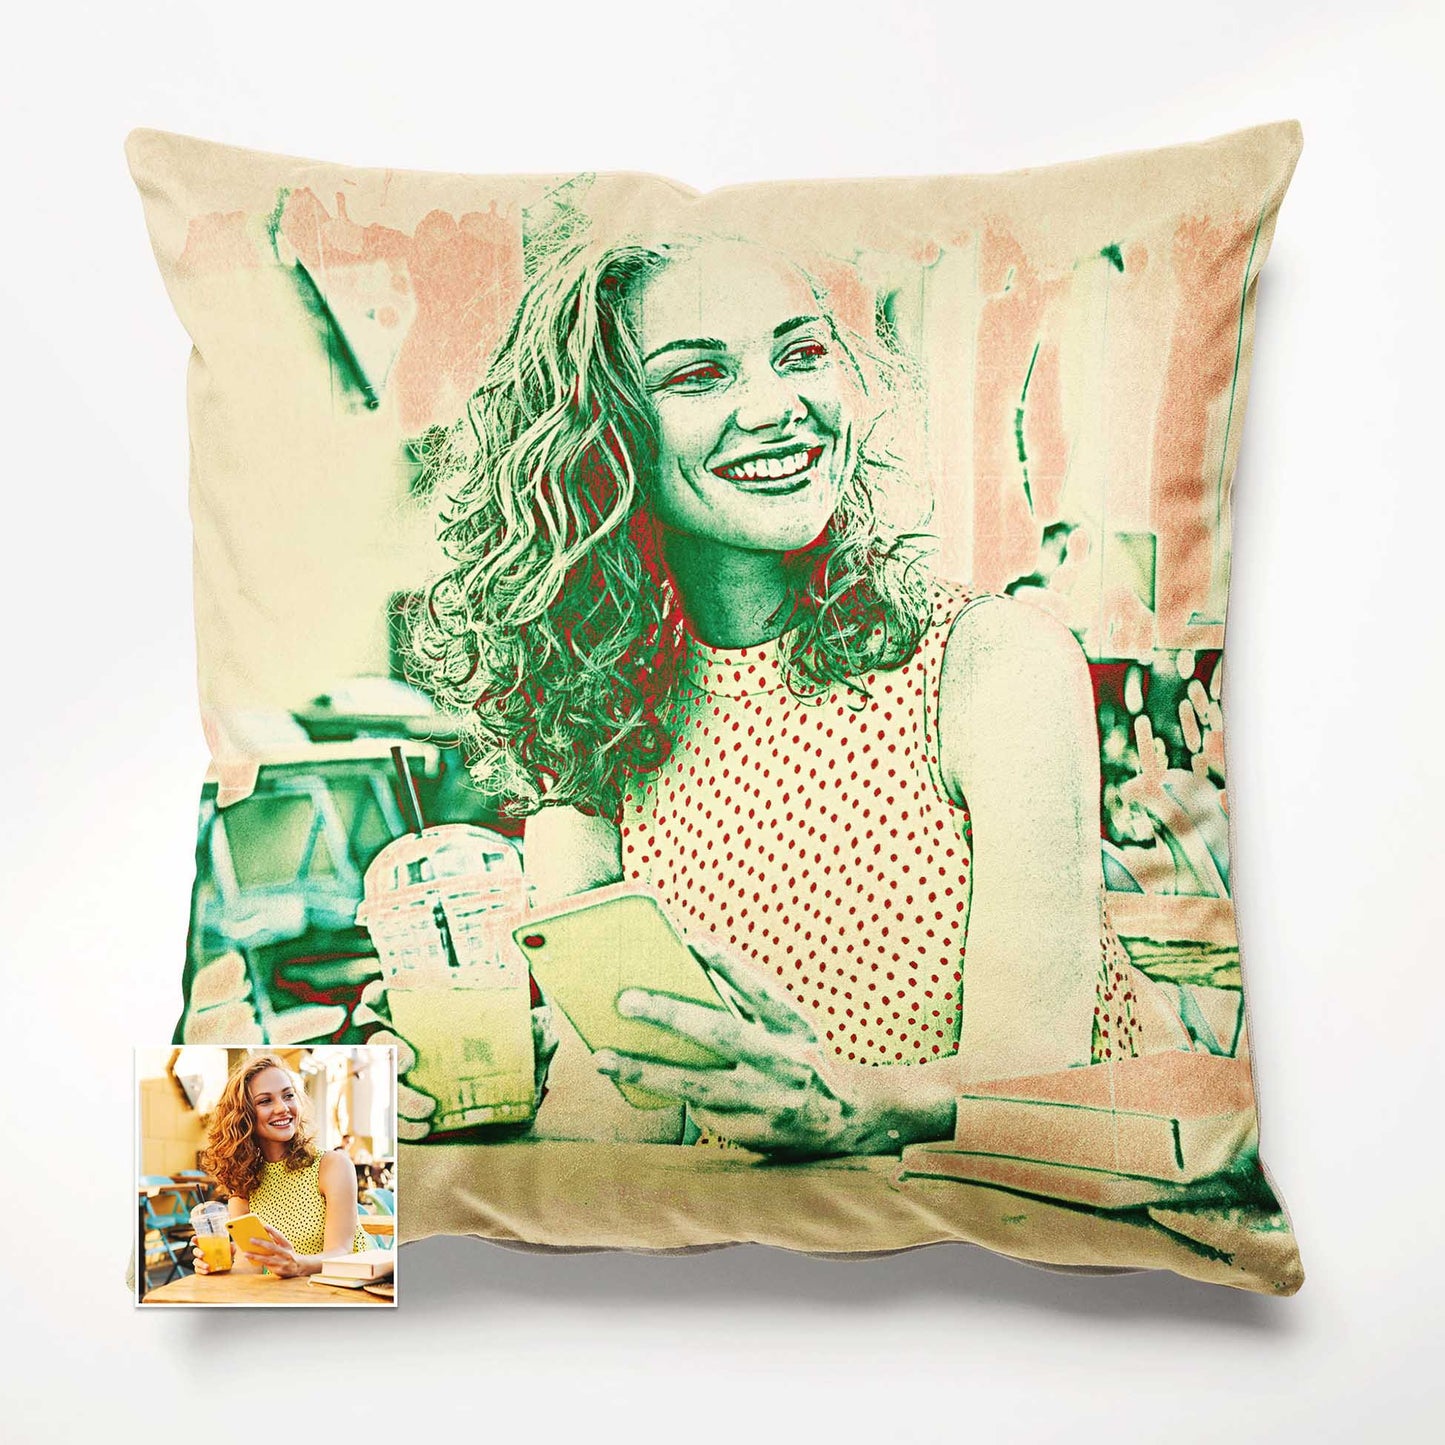 The Personalised Green & Red Cushion is a true statement of creativity and originality. Made with love and care, its velvet fabric offers a luxurious touch. The fresh and vibrant colors, along with the sharp printing